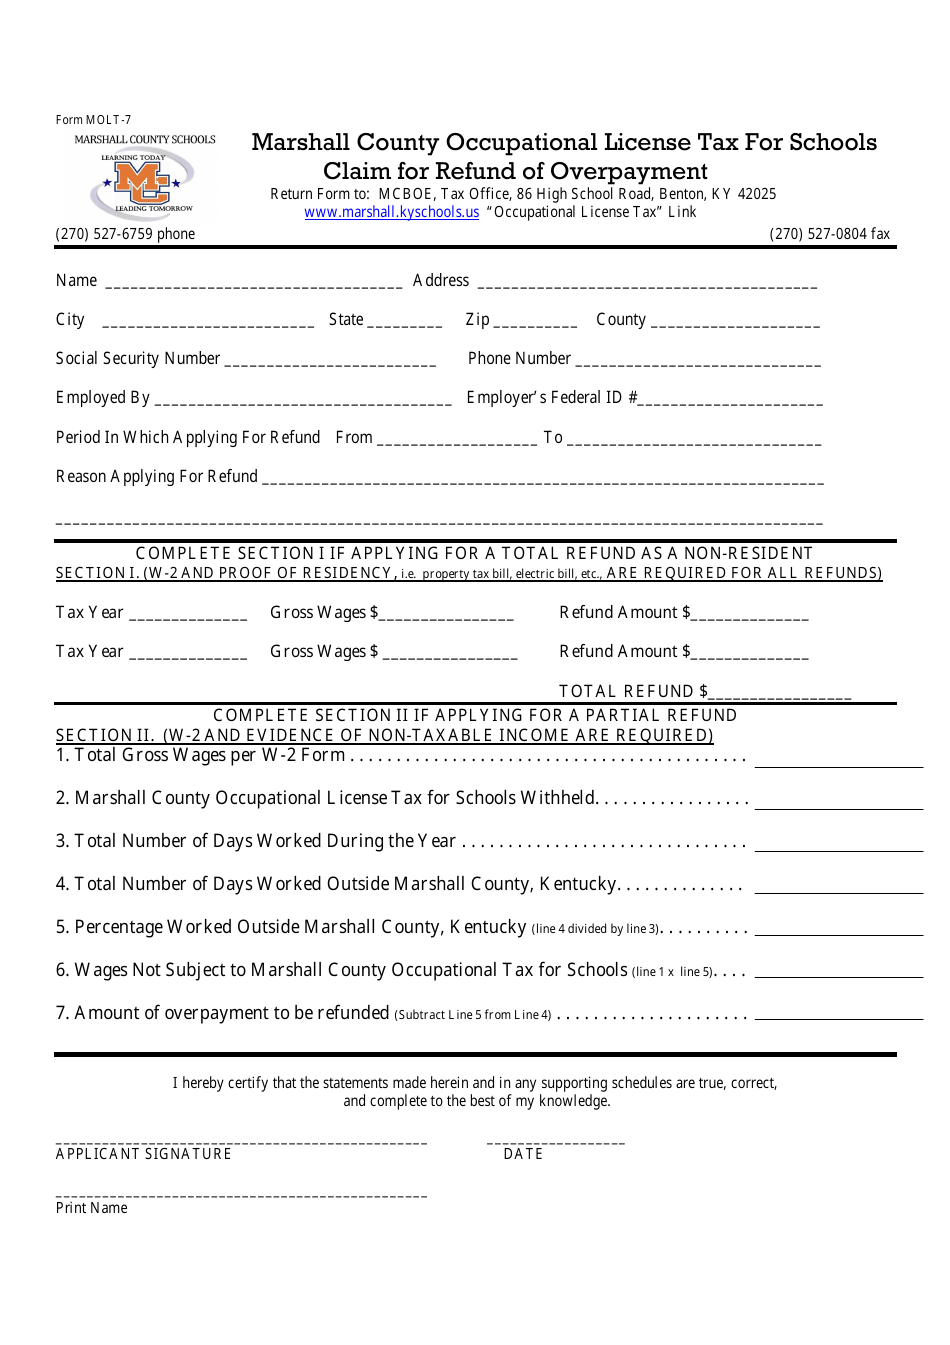 Form MOLT-7 Marshall County Occupational License Tax for Schools Claim for Refund of Overpayment - Marshall County, Kentucky, Page 1